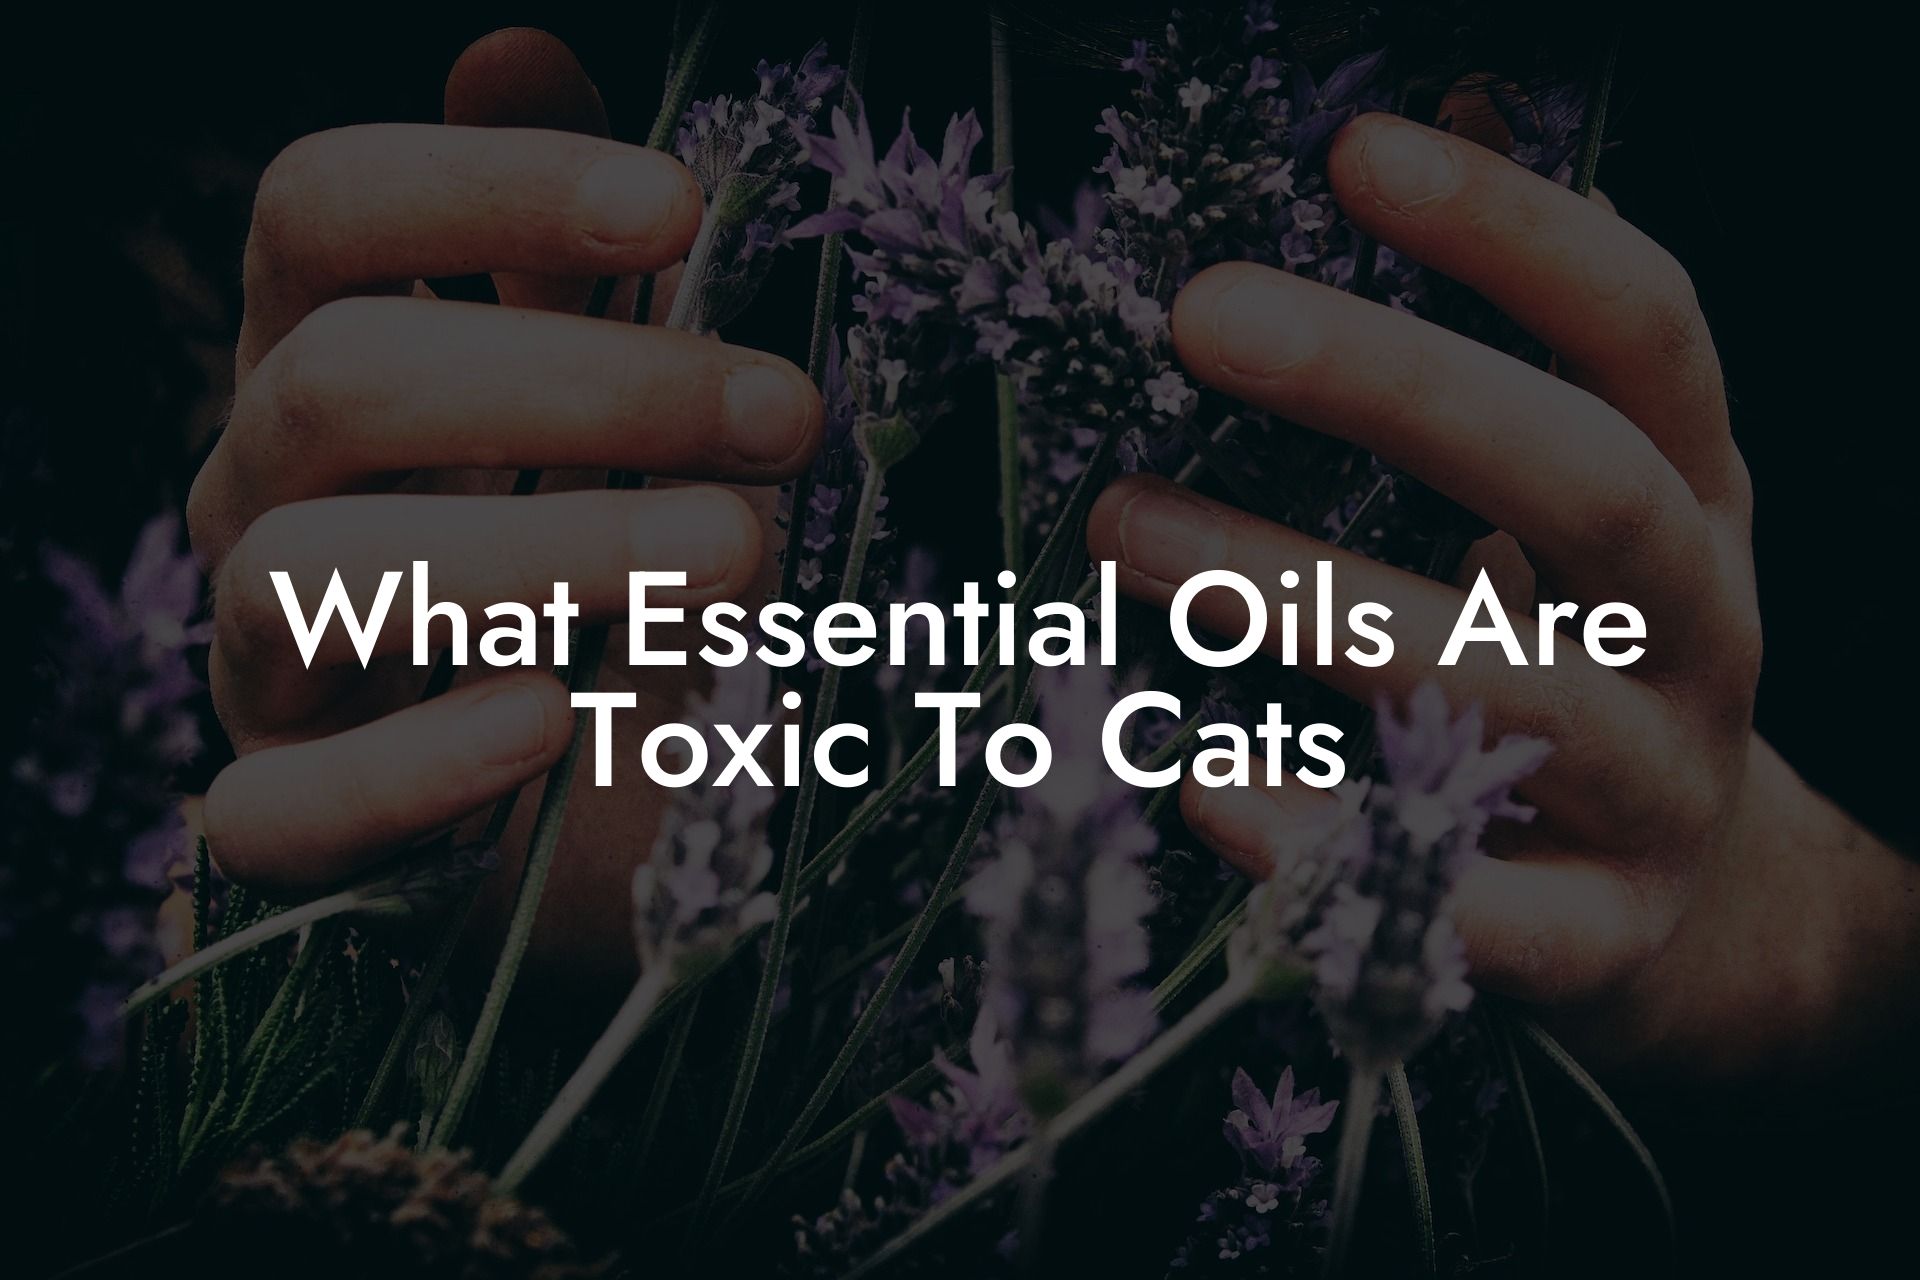 What Essential Oils Are Toxic To Cats